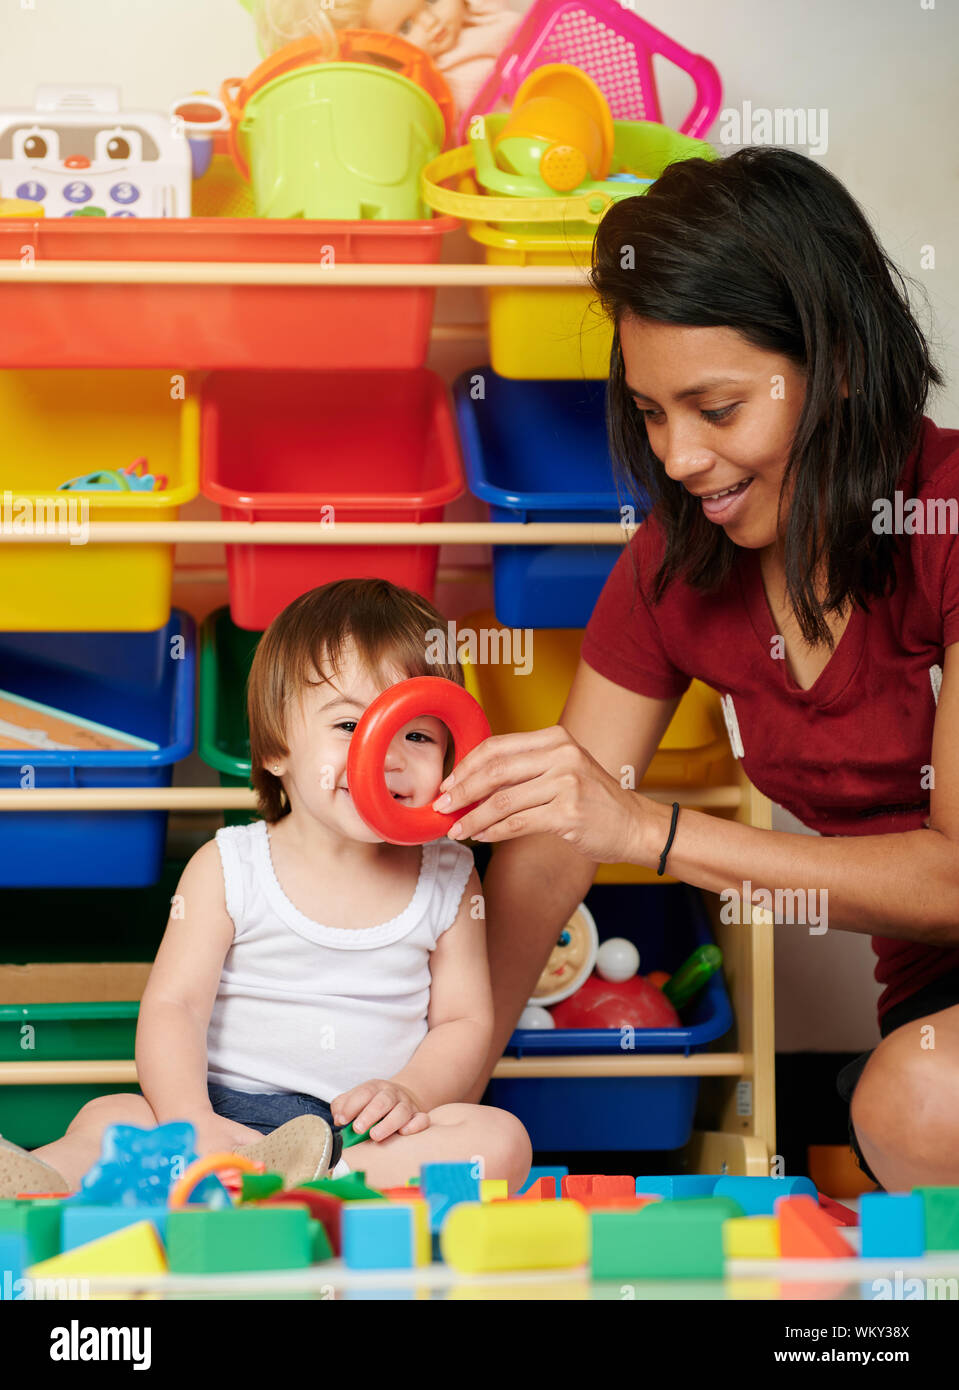 Babysitter have fun with baby on colorful toy background Stock Photo